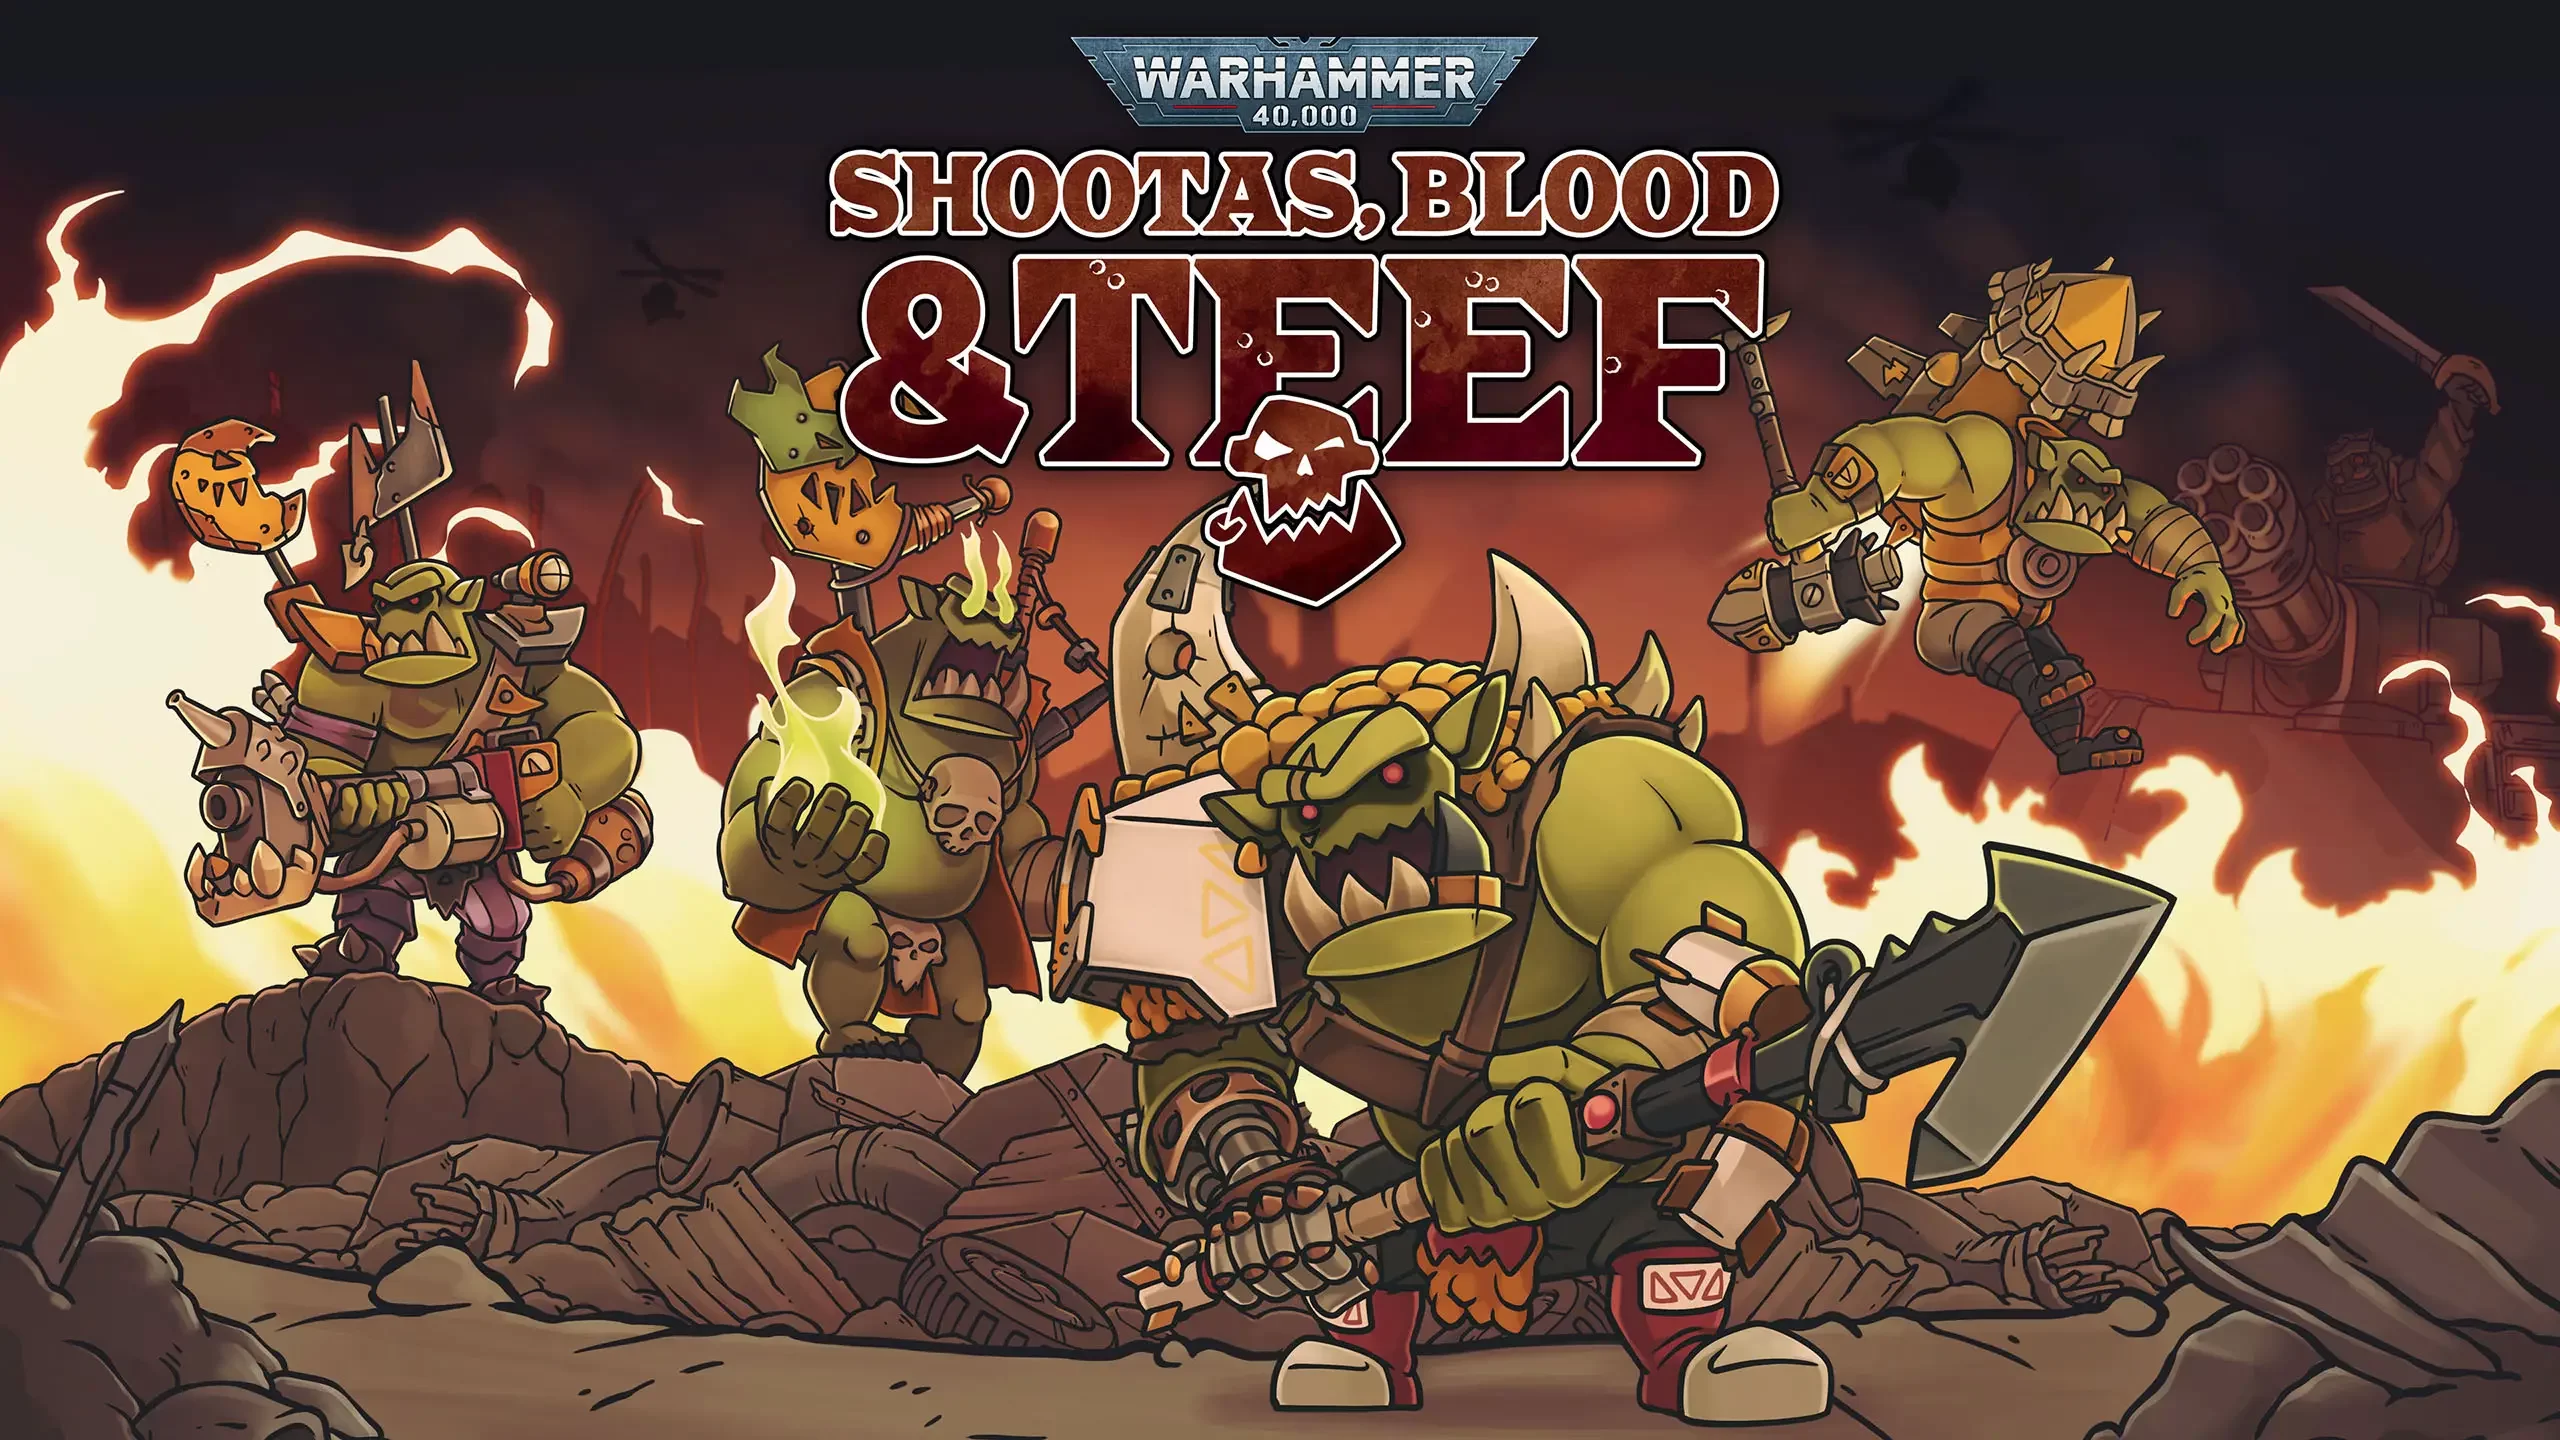 warhammer-40000-shootas-blood-and-teef-offer-l9p171-2364956-9084774